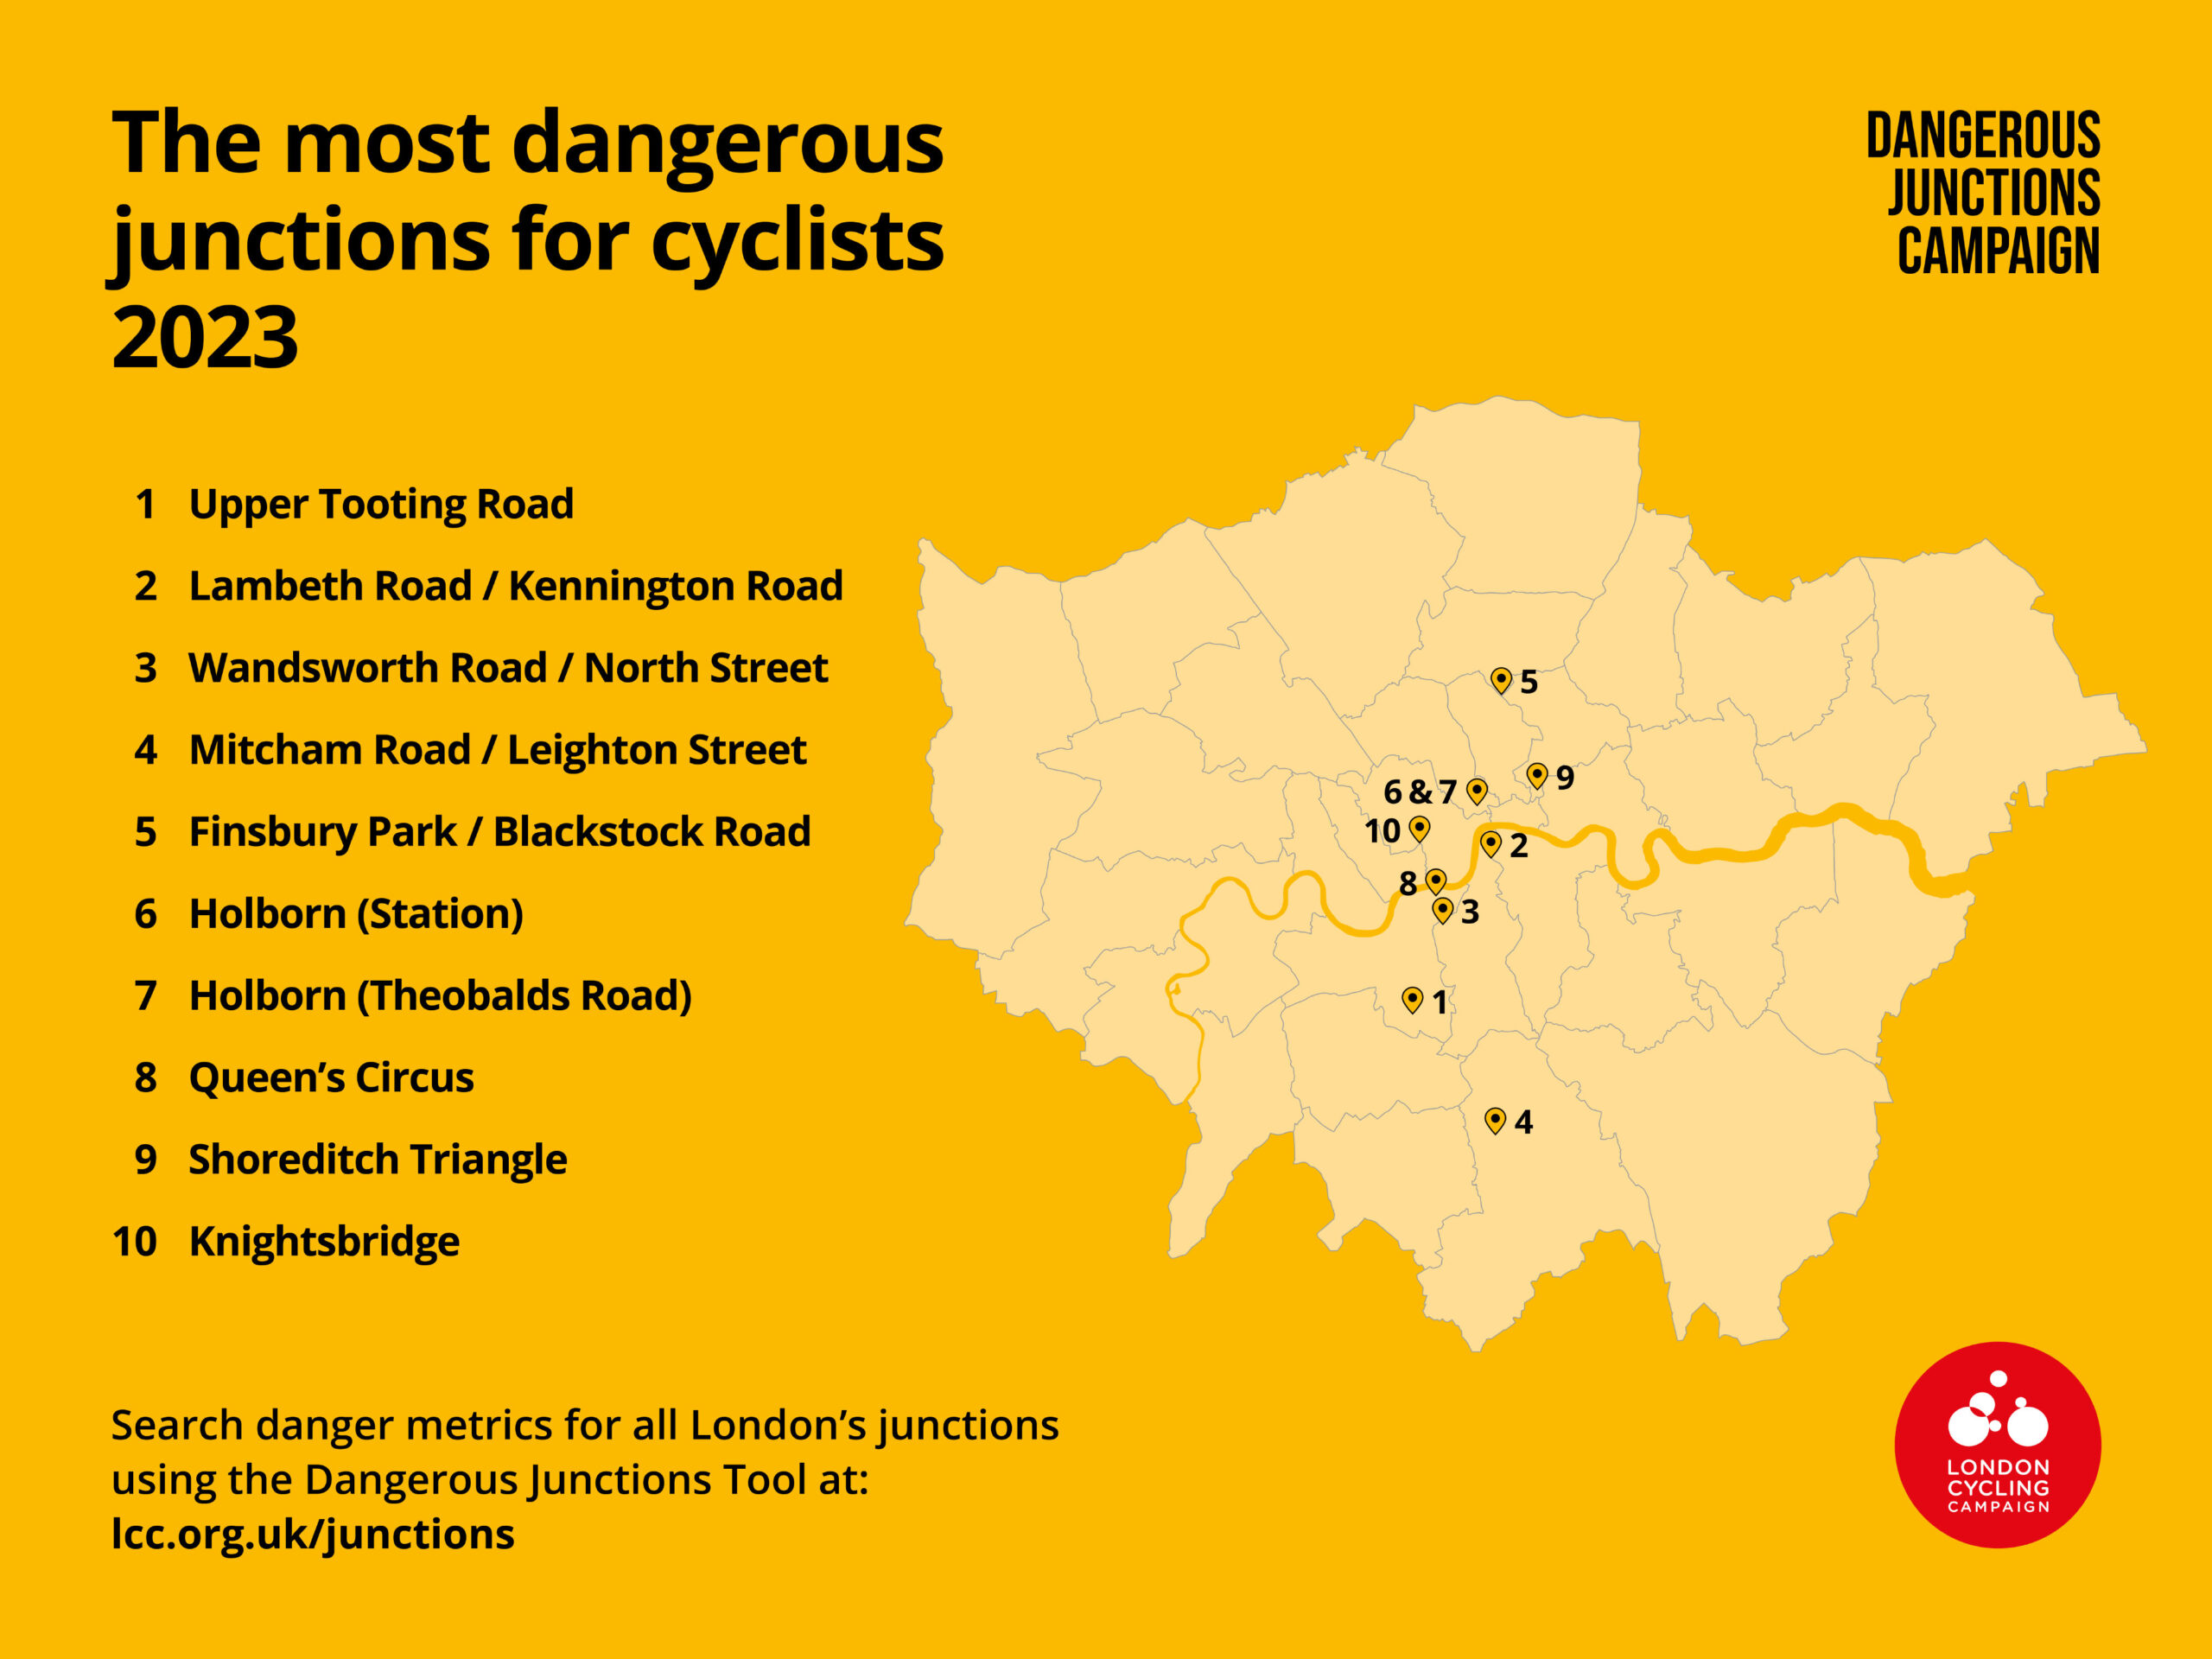 Map of London's 10 most dangerous junctions for cycling 